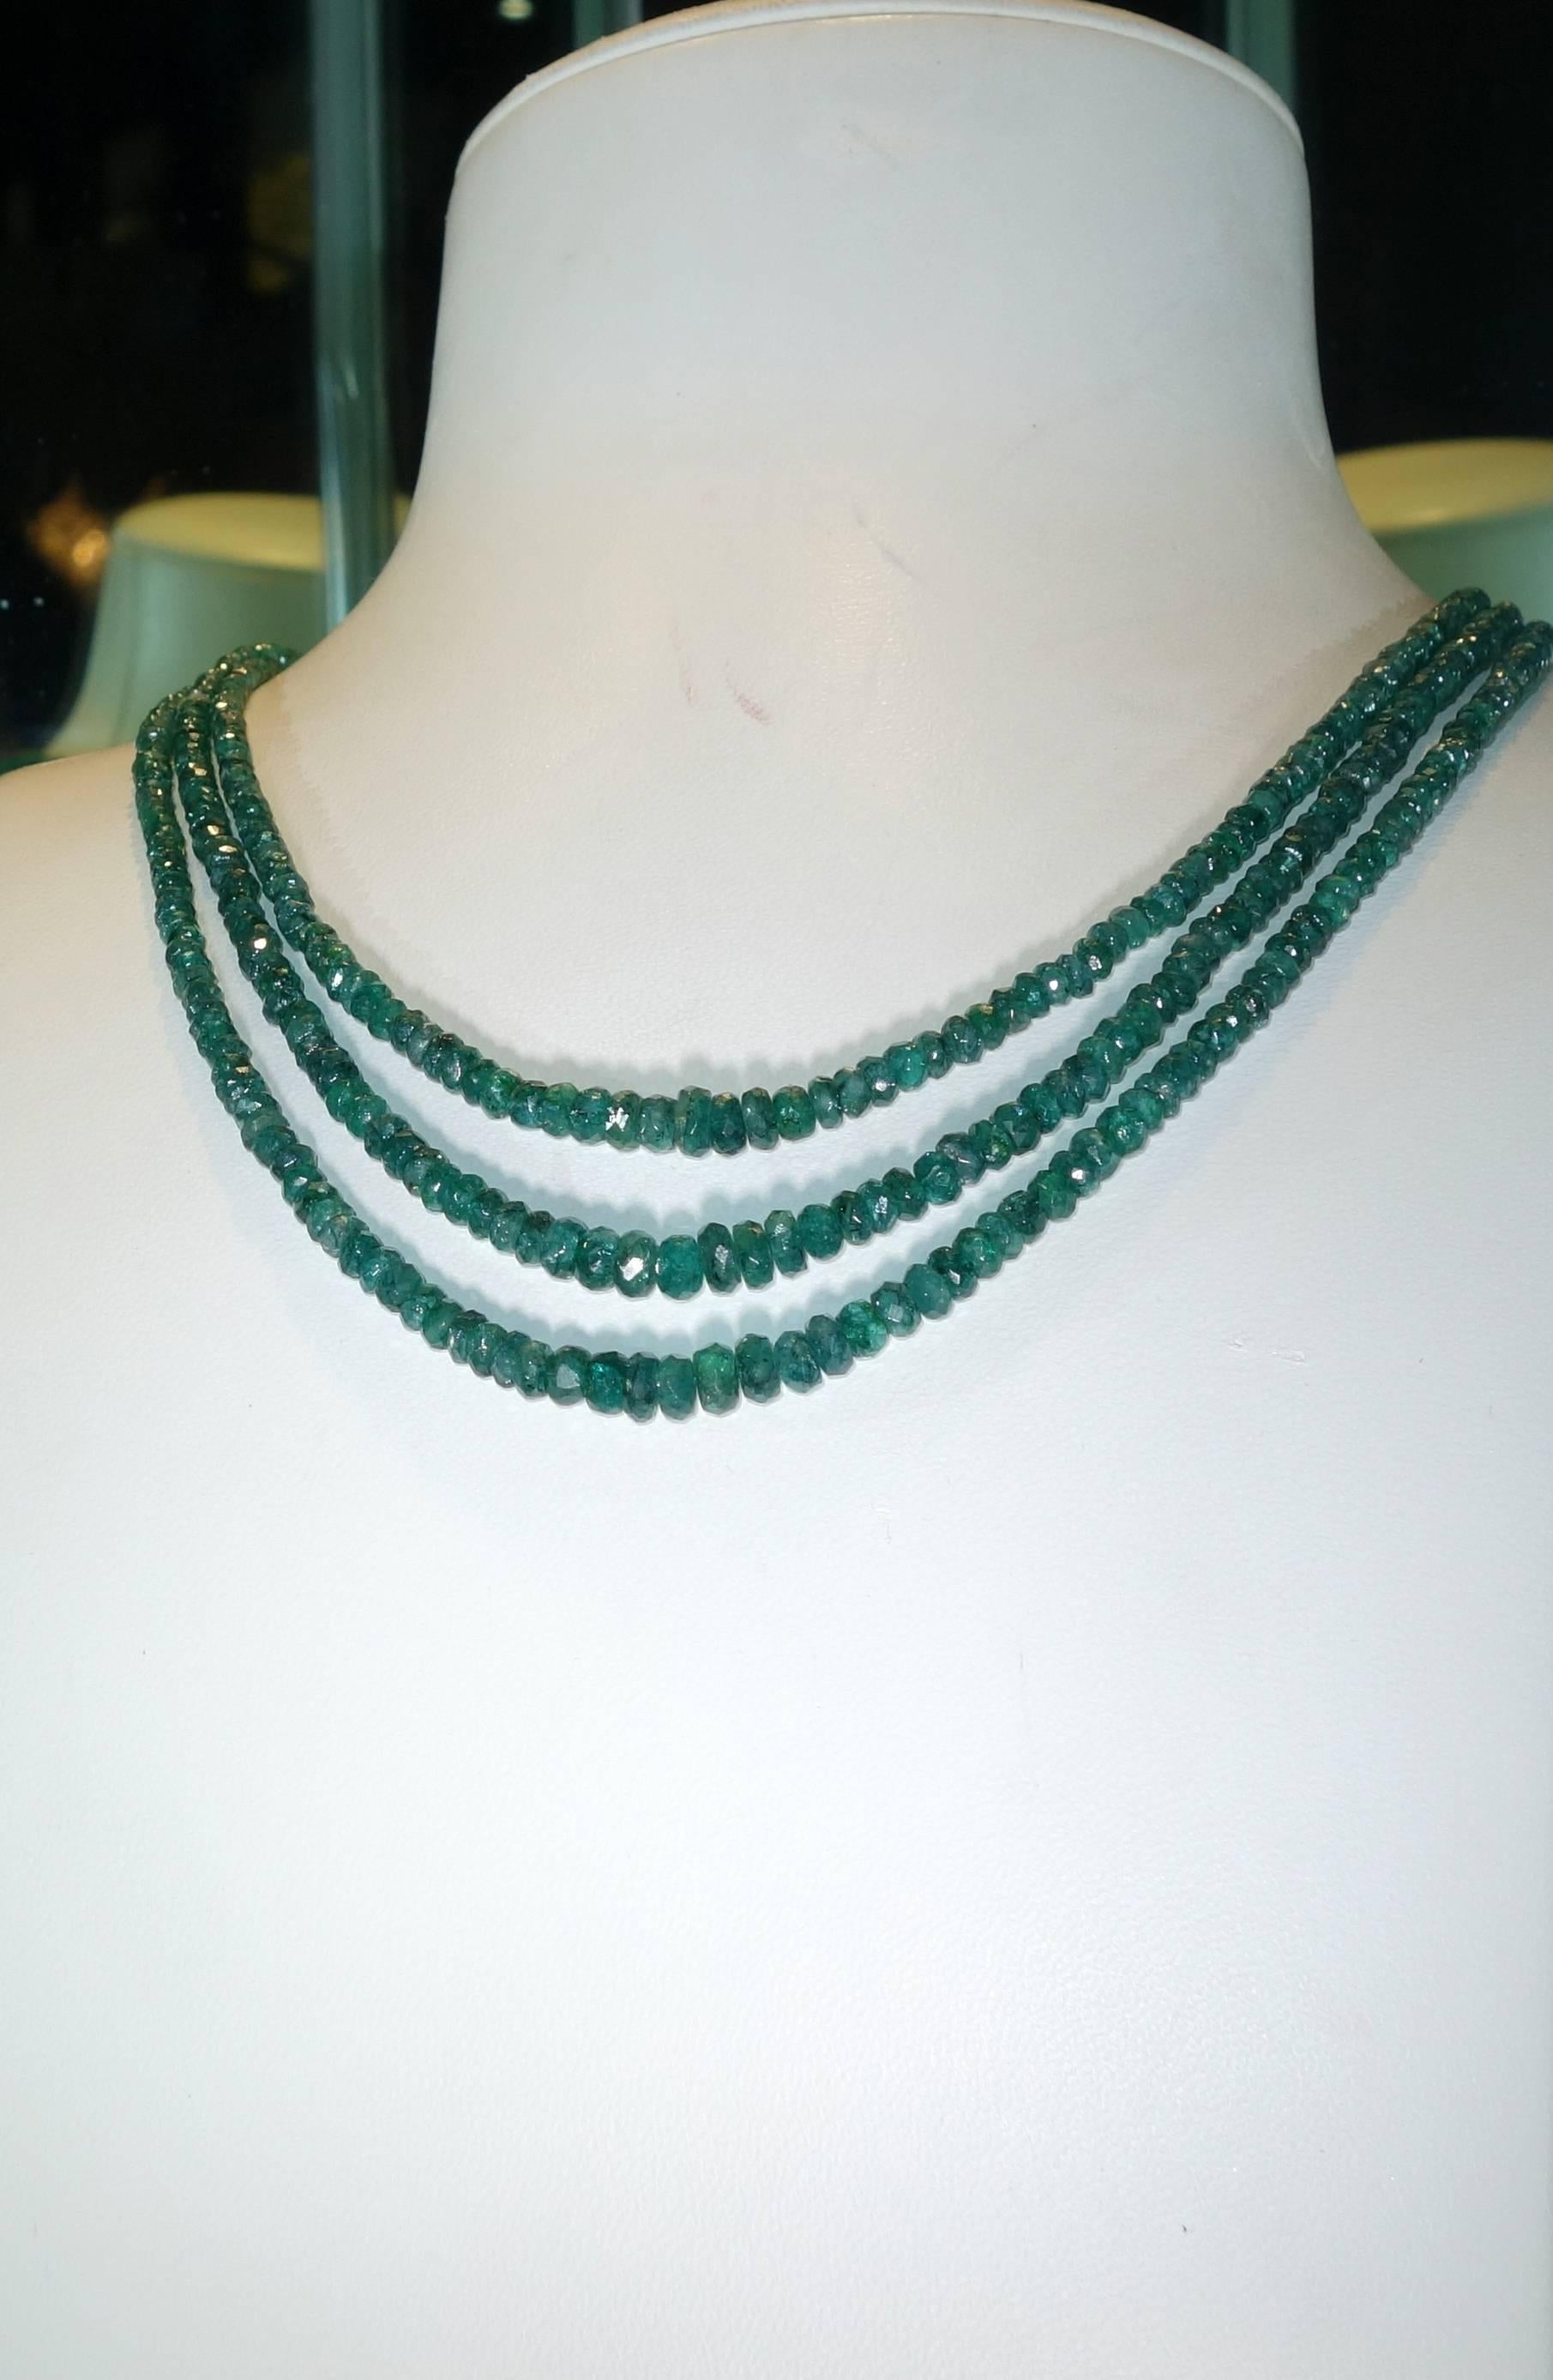 Finished with an 18K gold clasp, this necklace is three strands of natural faceted graduating emerald beads weighing approximately 145 cts.   The length of this necklace is 18.75 inches long and is a bright green statement for the neck.